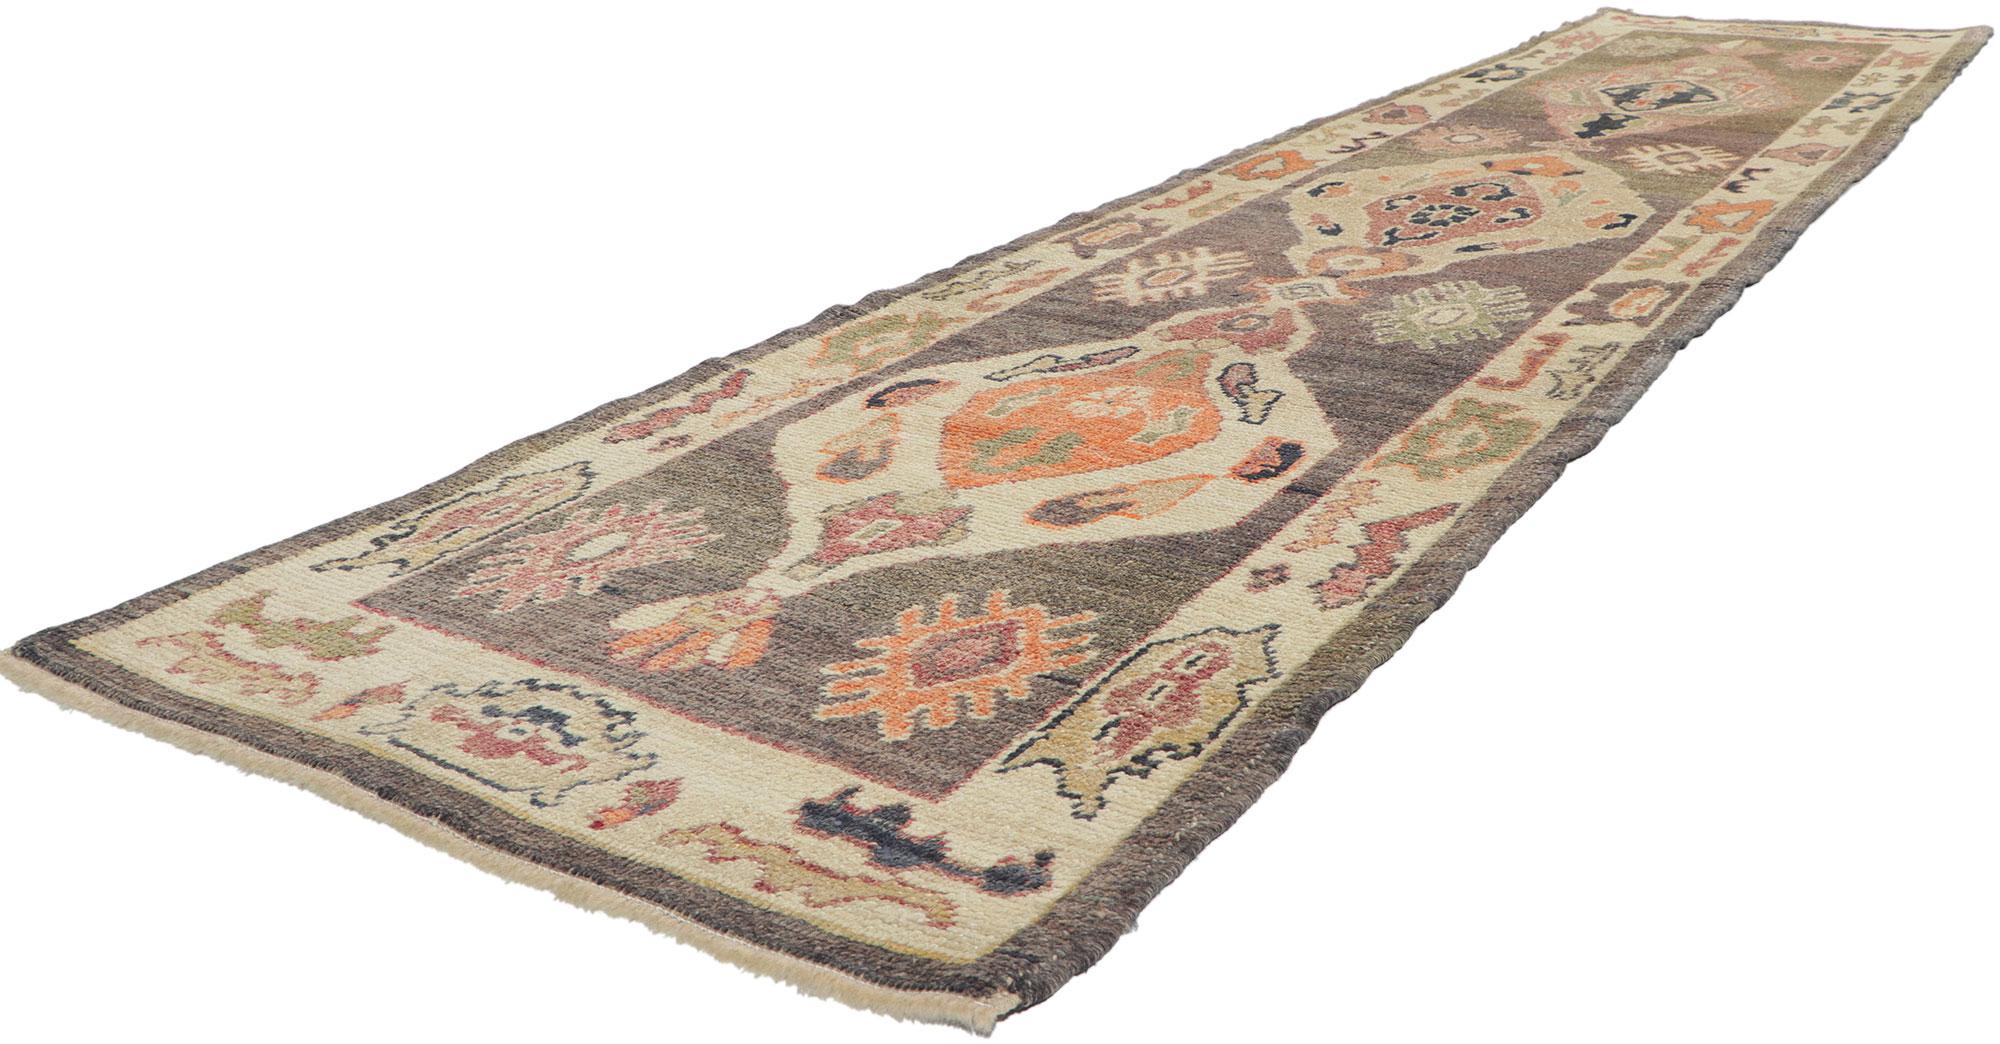 53793 Modern Earthy Turkish Oushak Rug Runner, 02'10 x 12'05.
Warm and inviting combined with incredible detail and texture, this modern Oushak rug runner is a captivating vision of woven beauty. The expressive design and earth-tone colors woven